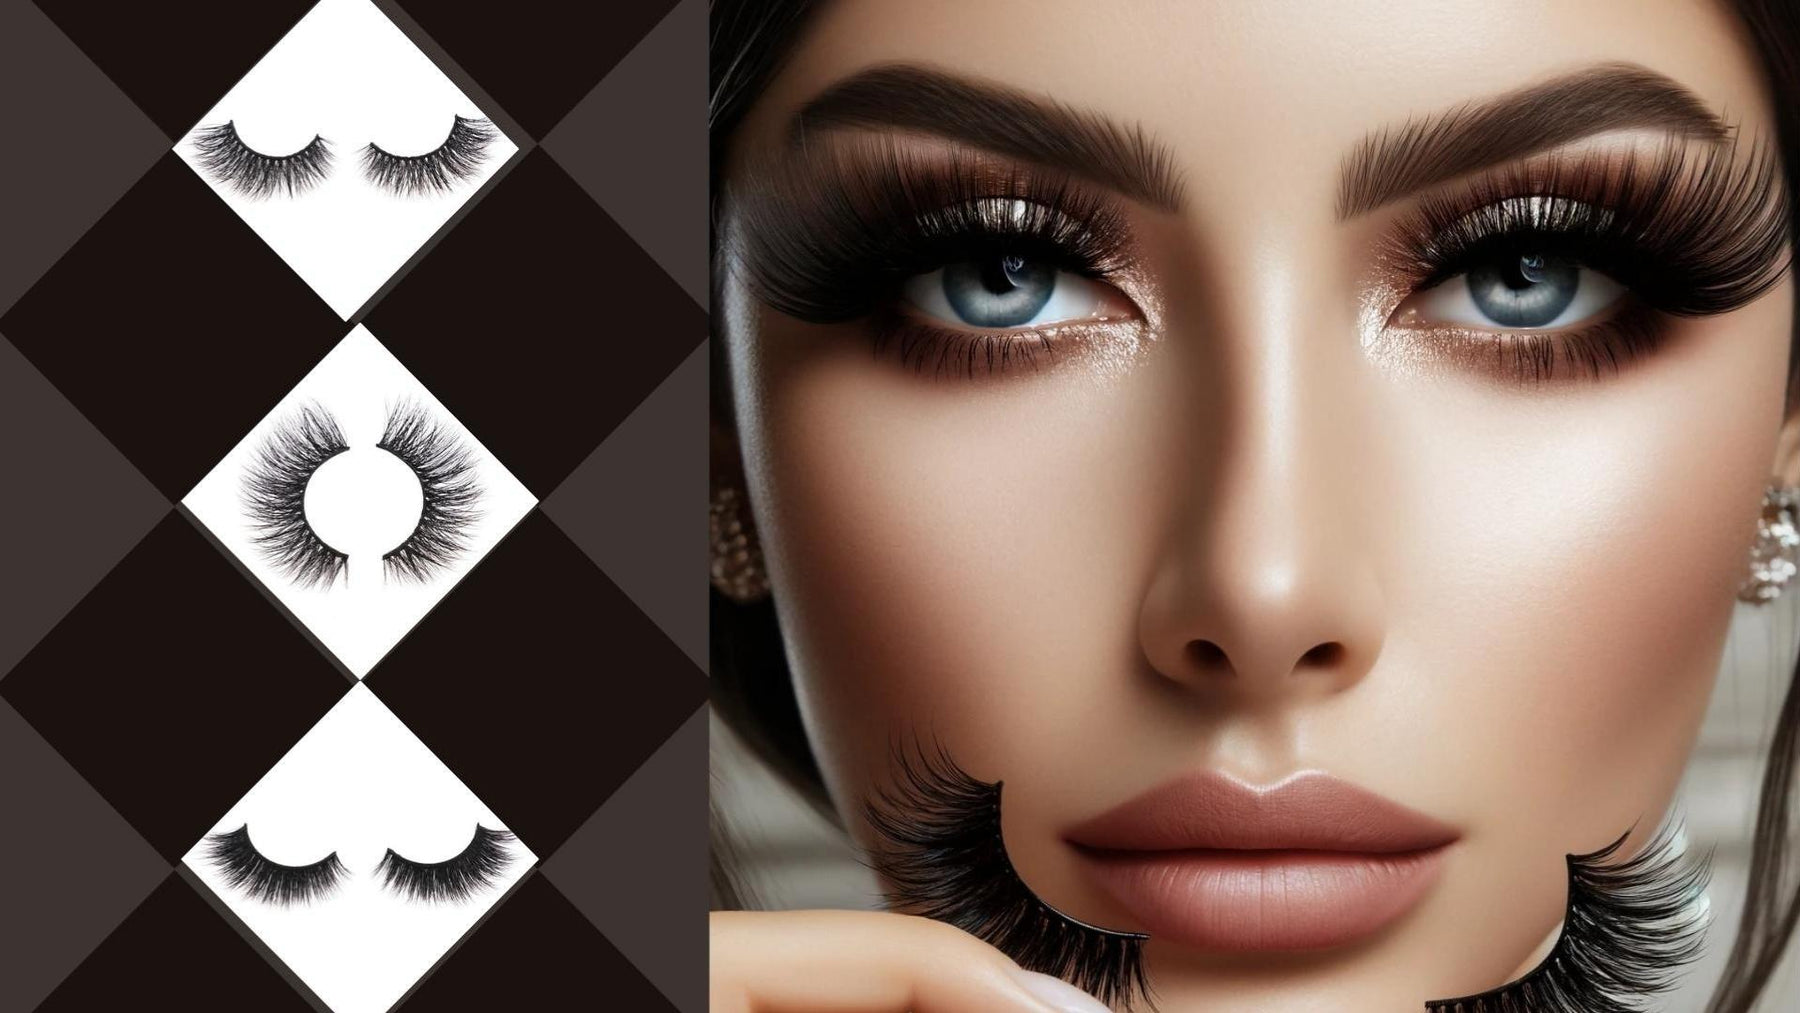 Occasions to Flaunt Your 3D Mink 25mm Lashes